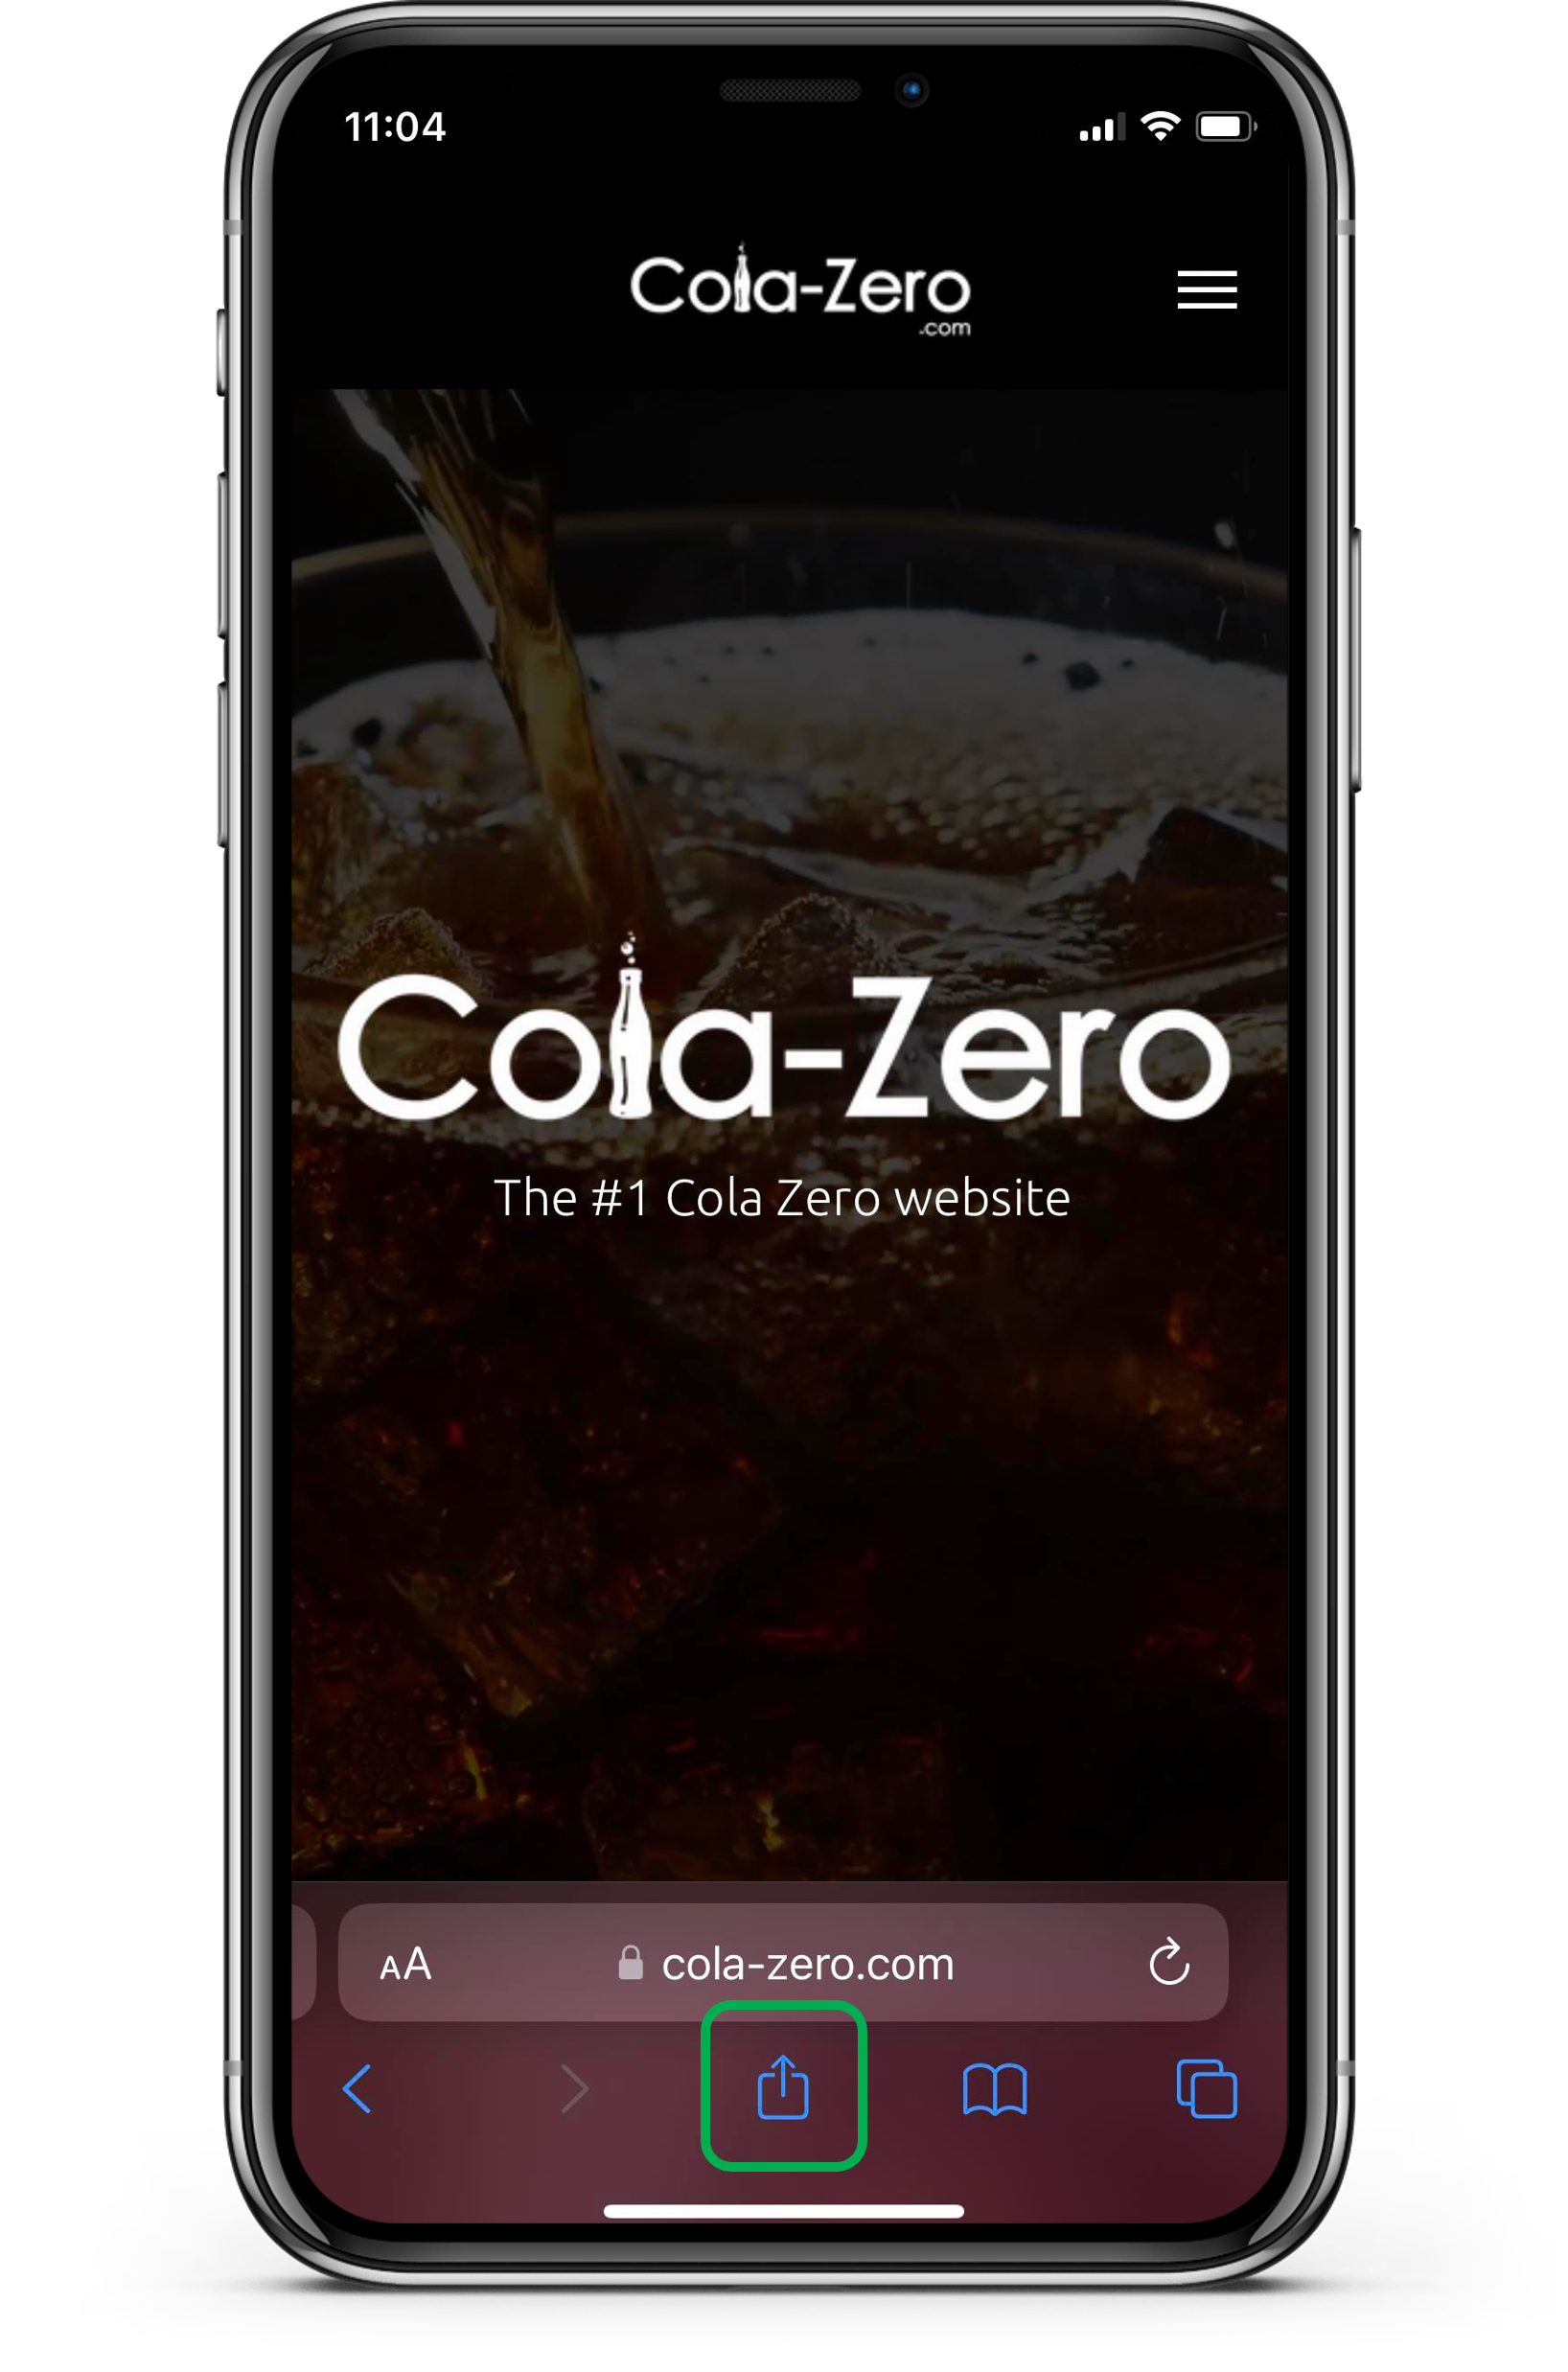 Add-to-Home-Screen-Android_like-an-app_Description-for-you-with-ex-Samsung-Galaxy-or-Huawei-P30-Pro_Step-1_Cola-Zero.com